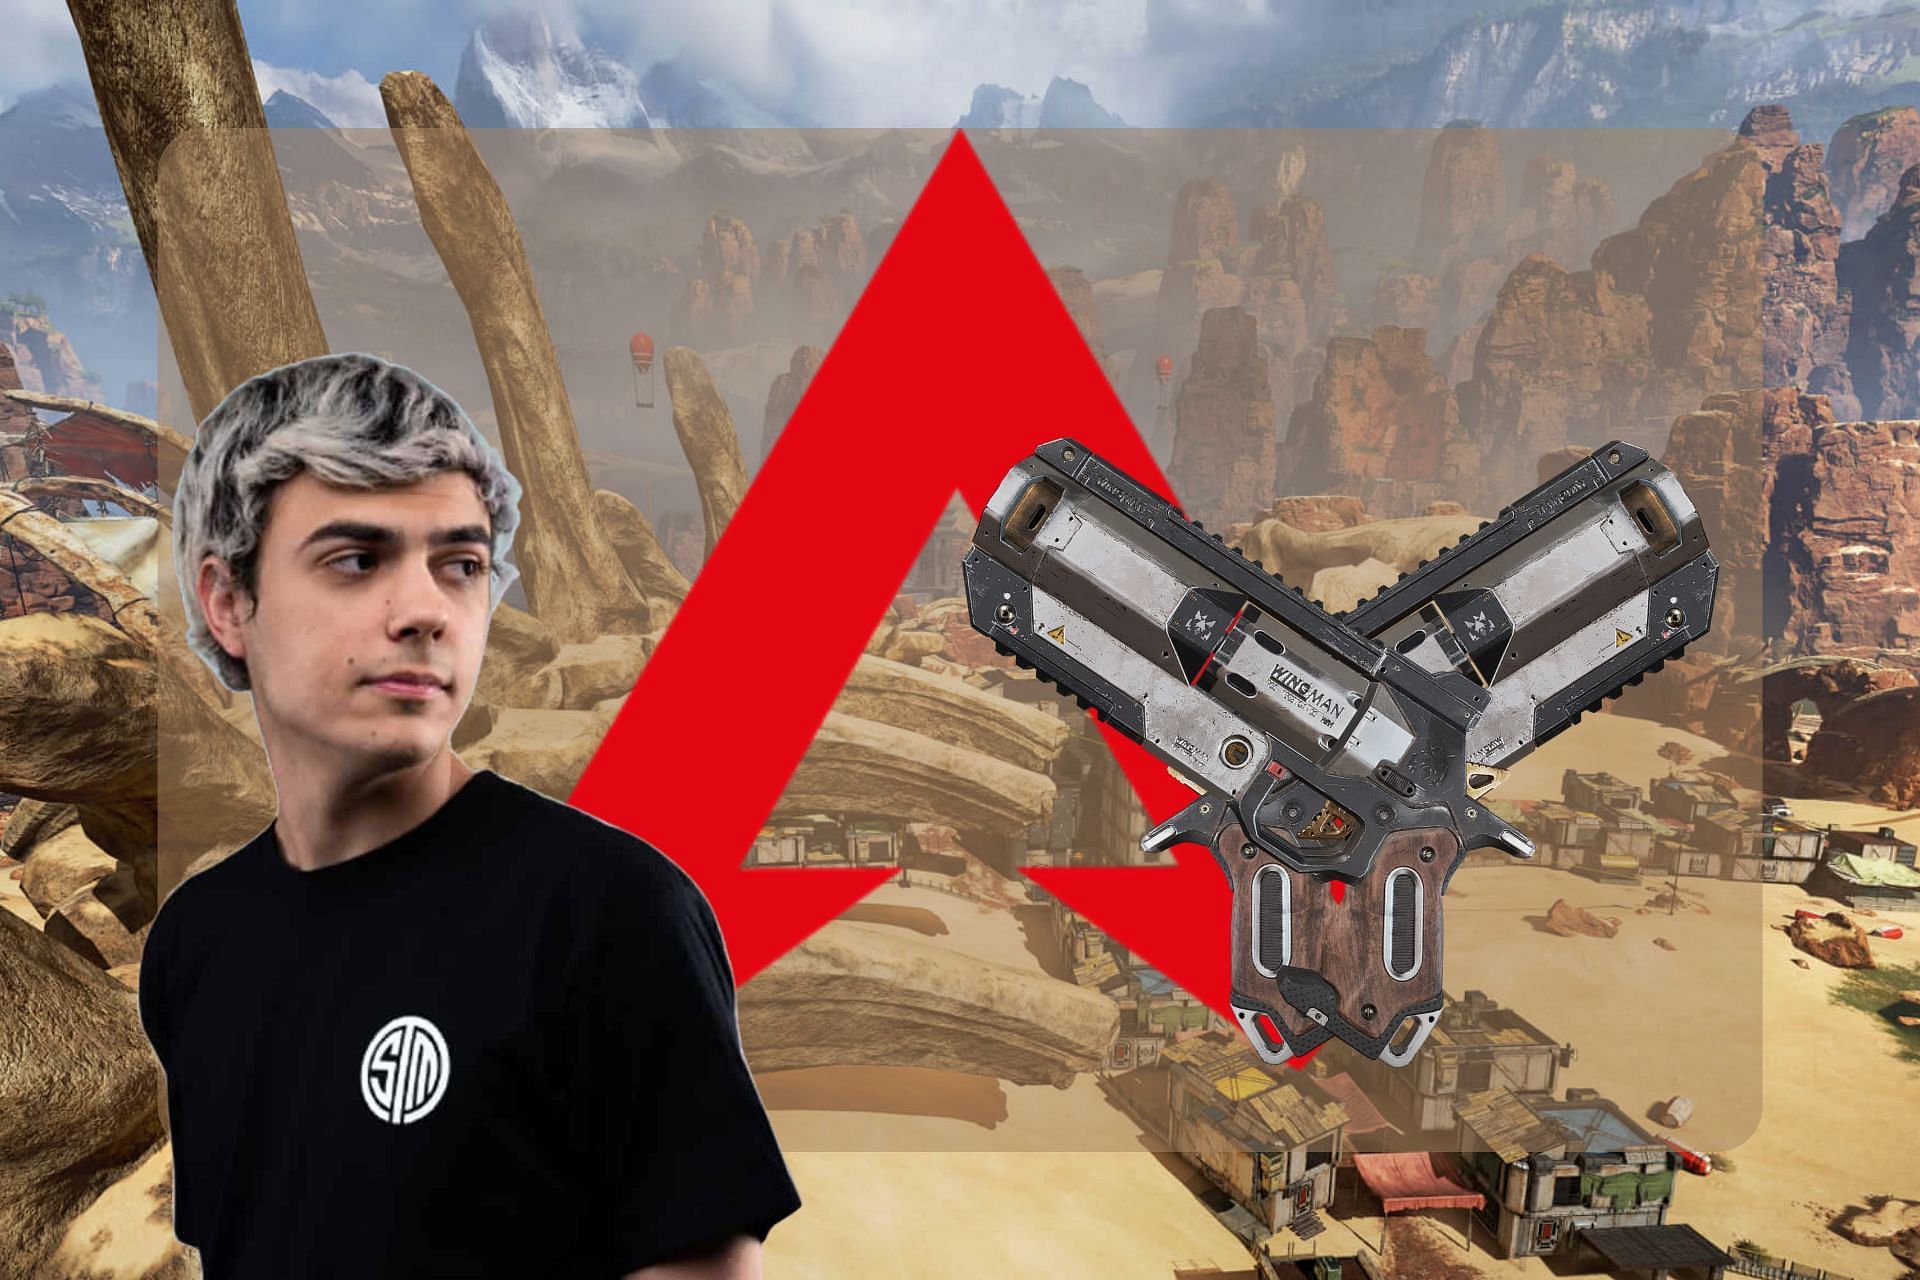 Imperialhal thinks that the Wingman should be nerfed in Apex Legends (Image by Sportskeeda)